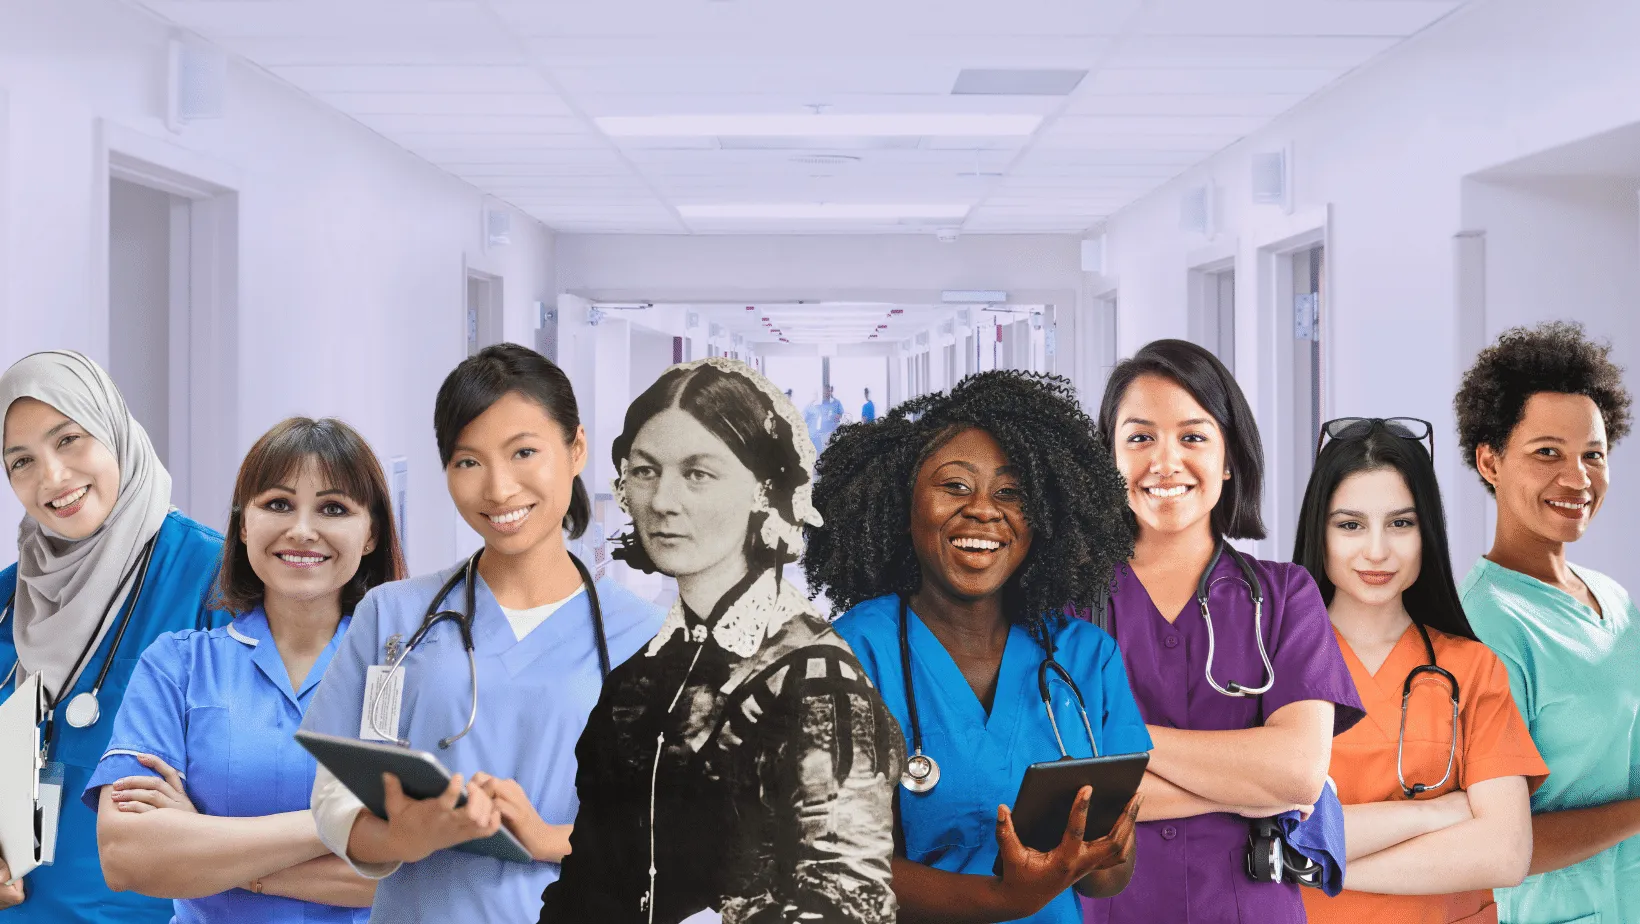 A collage of diverse female healthcare professionals in uniforms, including nurses and a doctor, with a historical figure in black and white superimposed in the center, symbolizing the legacy and future of nursing, set against a hospital corridor backdrop.